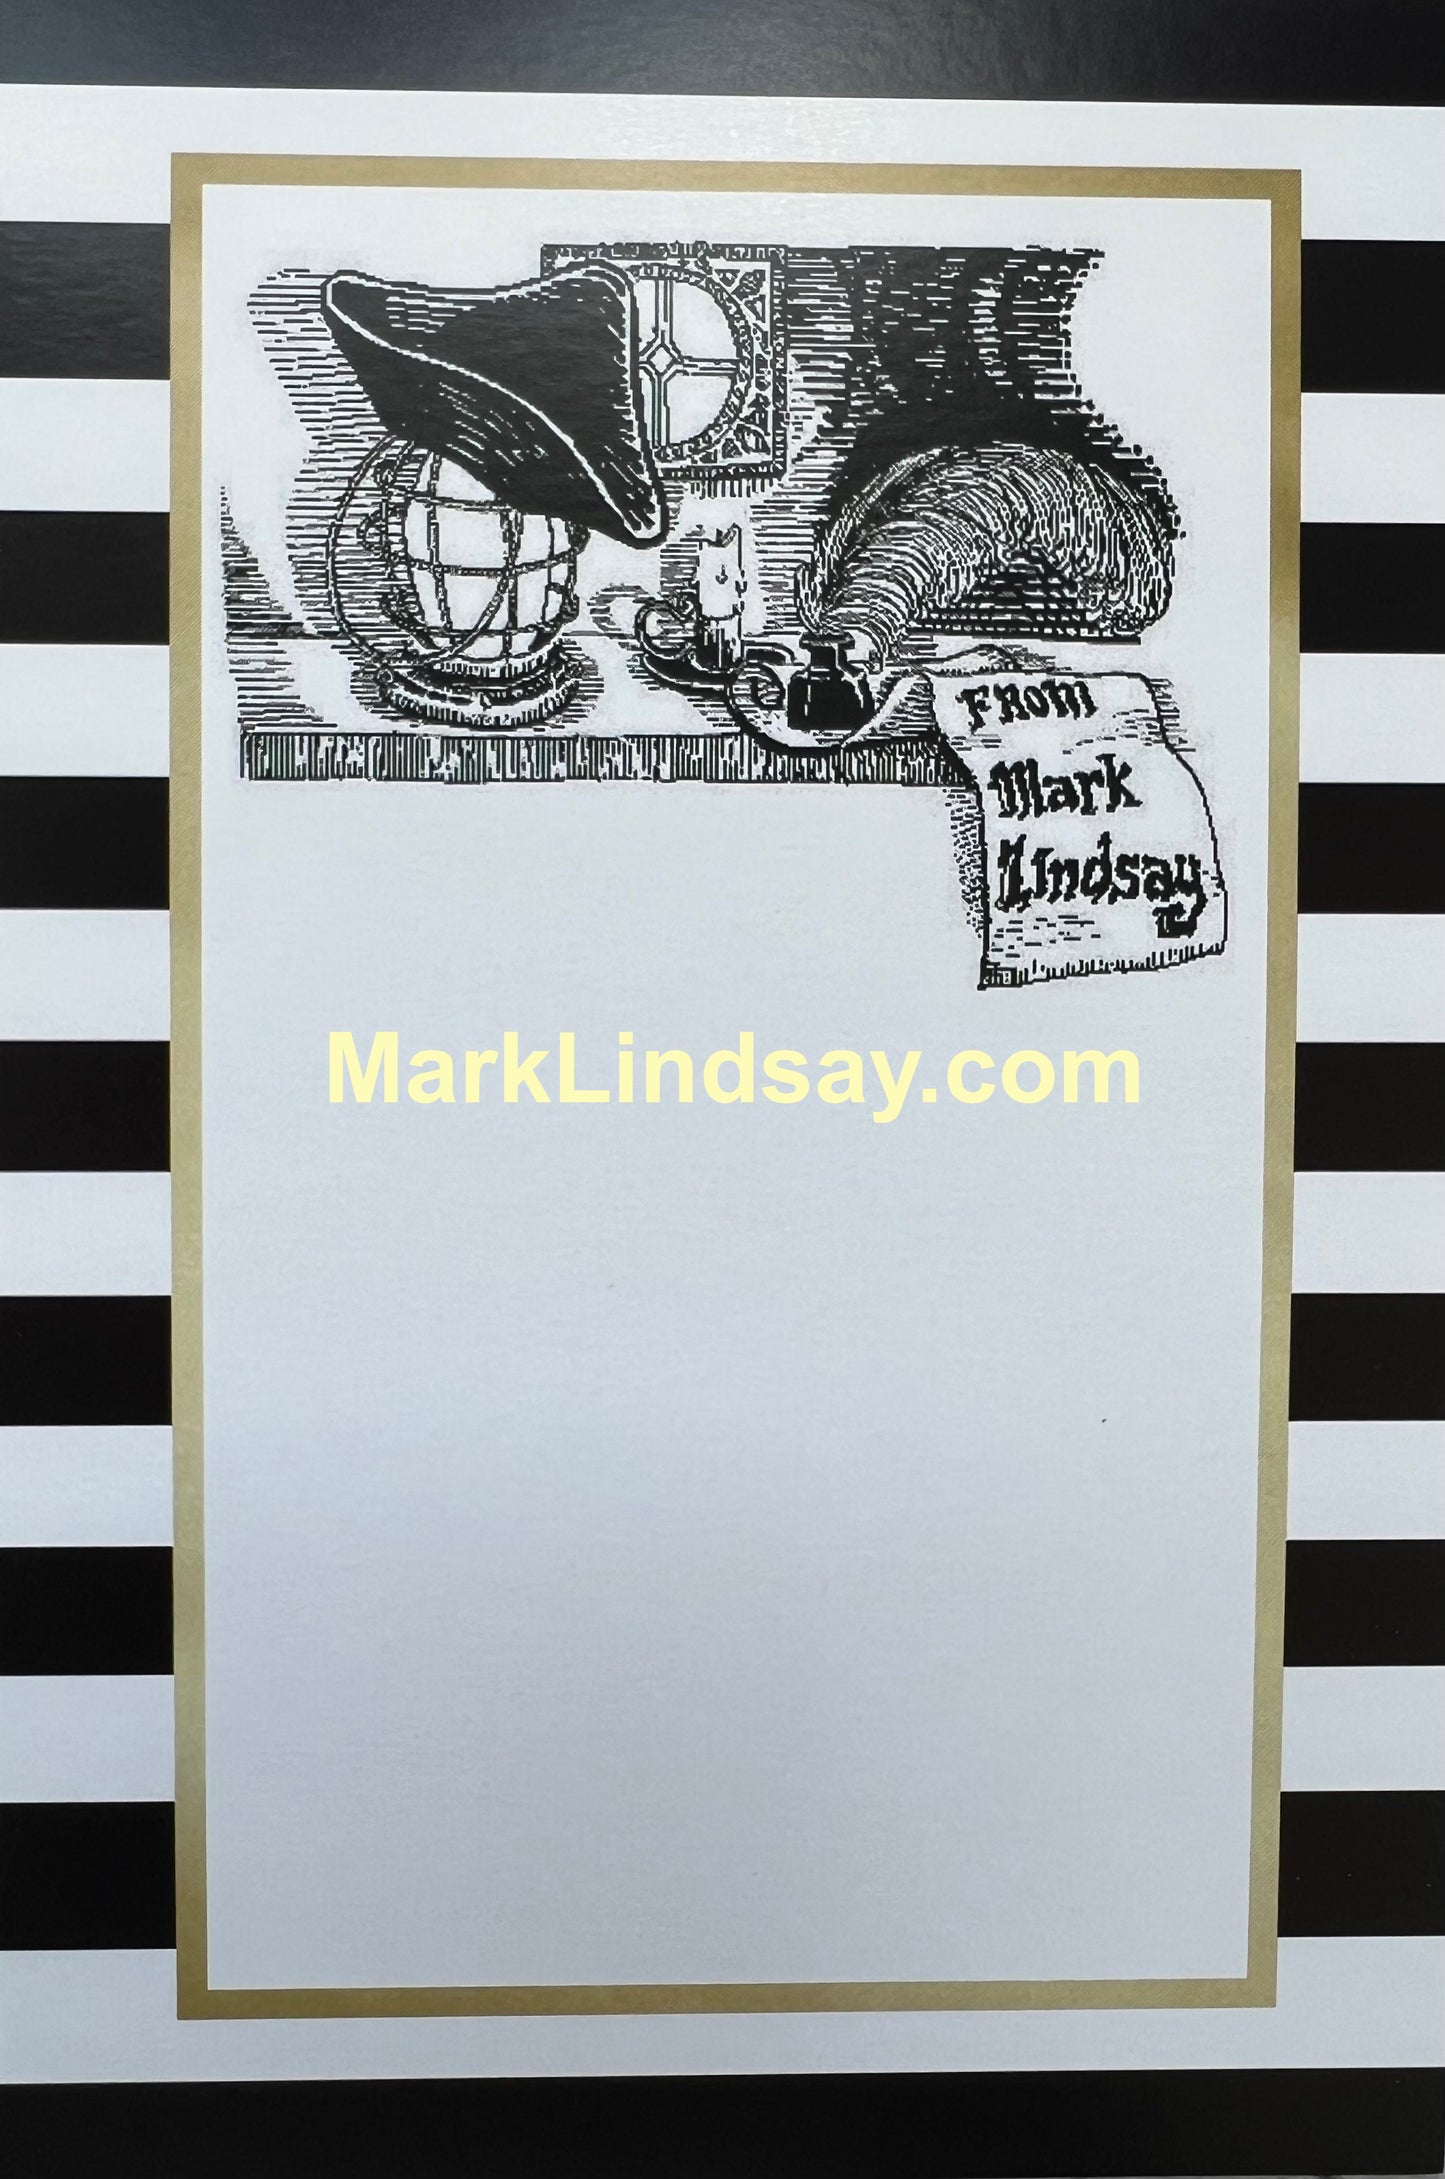 1966 Mark Lindsay Fan Club Newsletter + Card - Personally Autographed to YOU by Mark